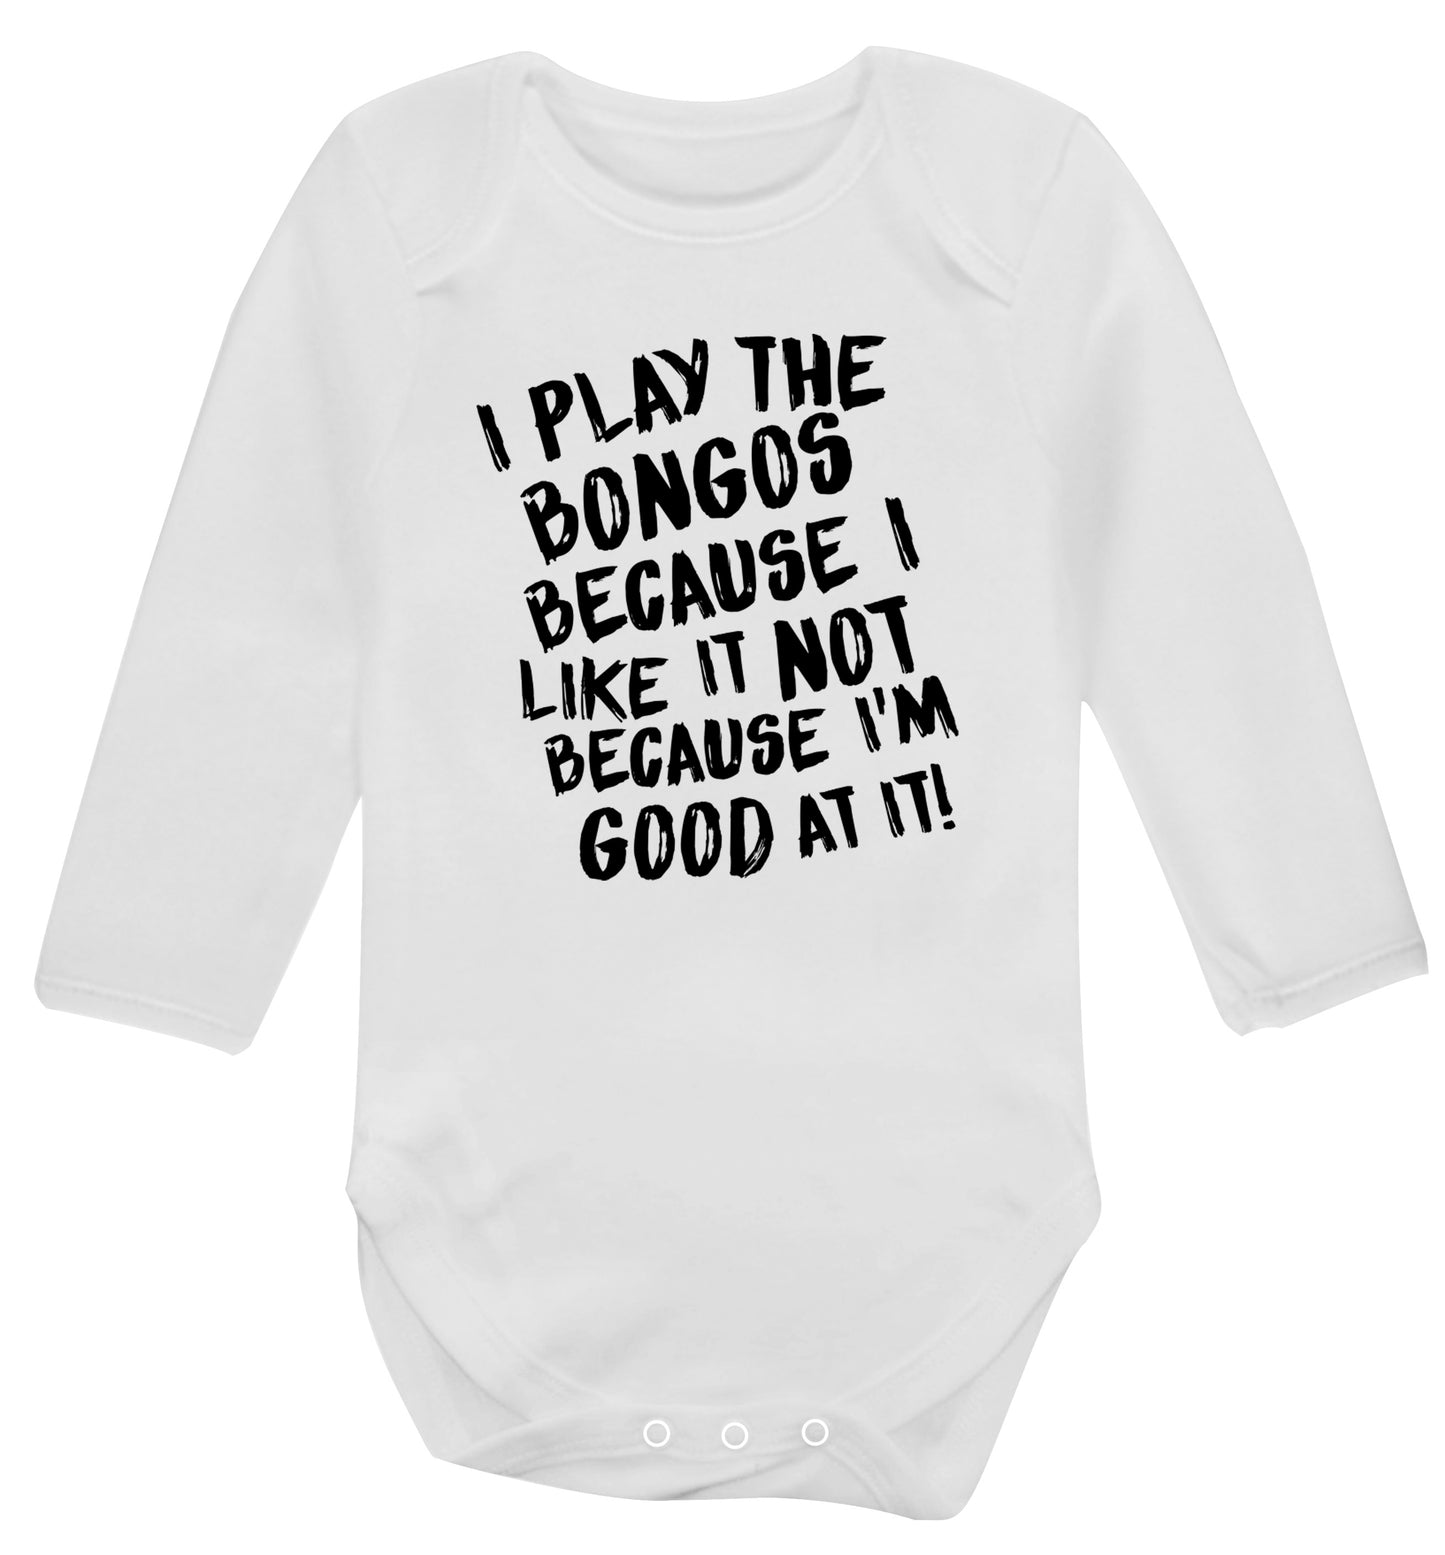 I play the bongos because I like it not because I'm good at it Baby Vest long sleeved white 6-12 months